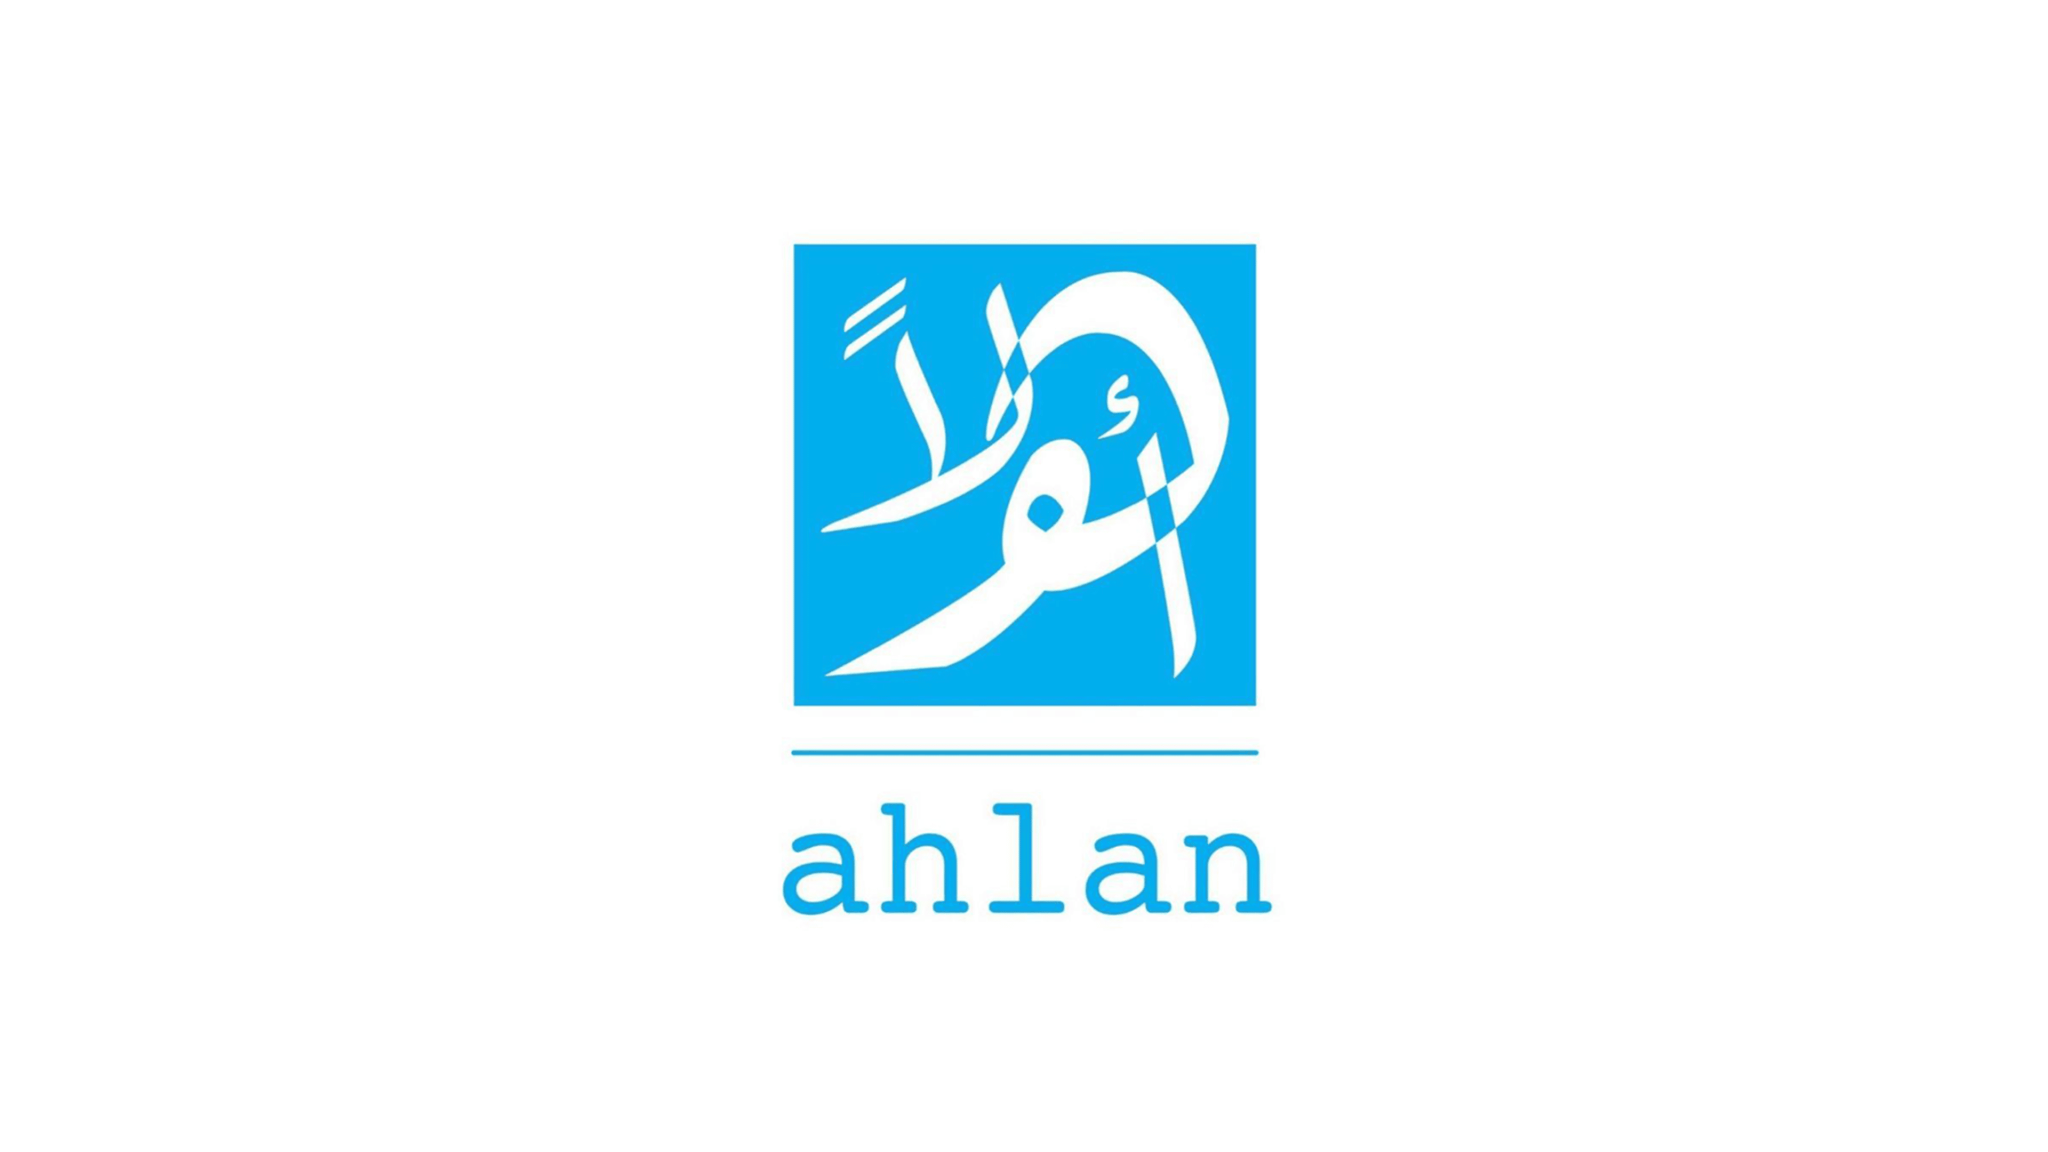 Ahlan brings a new approach to local tourism and productive economies through a network of Matbakh (home restaurants), Beit (guest houses) and Deken (farm shops) – owned by small-scale farmers and producers, across Lebanon. All these projects are community-based social enterprises that aim at creating sustainable and local businesses, and providing opportunities for vulnerable youth, females and families within their communities to meet the increasing demand in the agro-tourism sector. An interesting and sustainable project we have the pleasure of communicating on social media, in partnership with Souk el Tayeb and with the support of Unicef Lebanon. 10